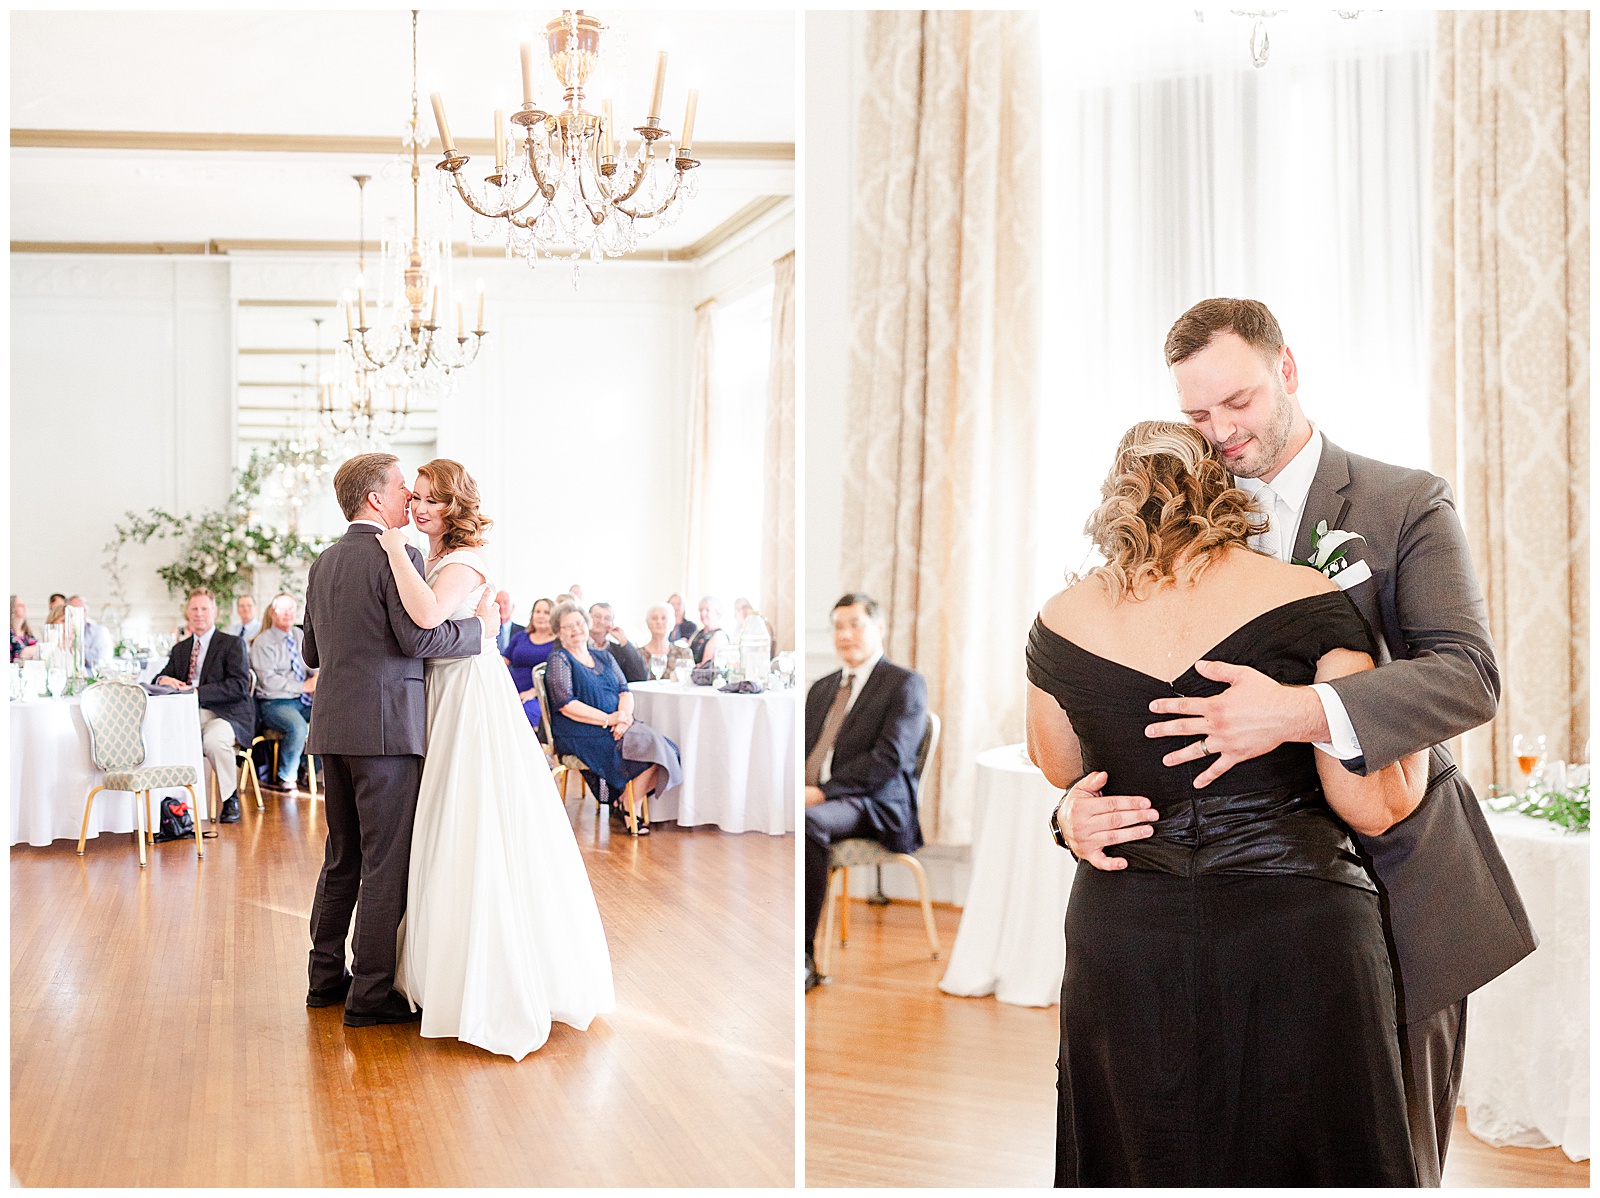 Father-Daughter and Mother-Son Dance at elegant indoor floral venue in 1940s Modern Vintage Wedding in Charlotte, NC | check out the full wedding at KevynDixonPhoto.com